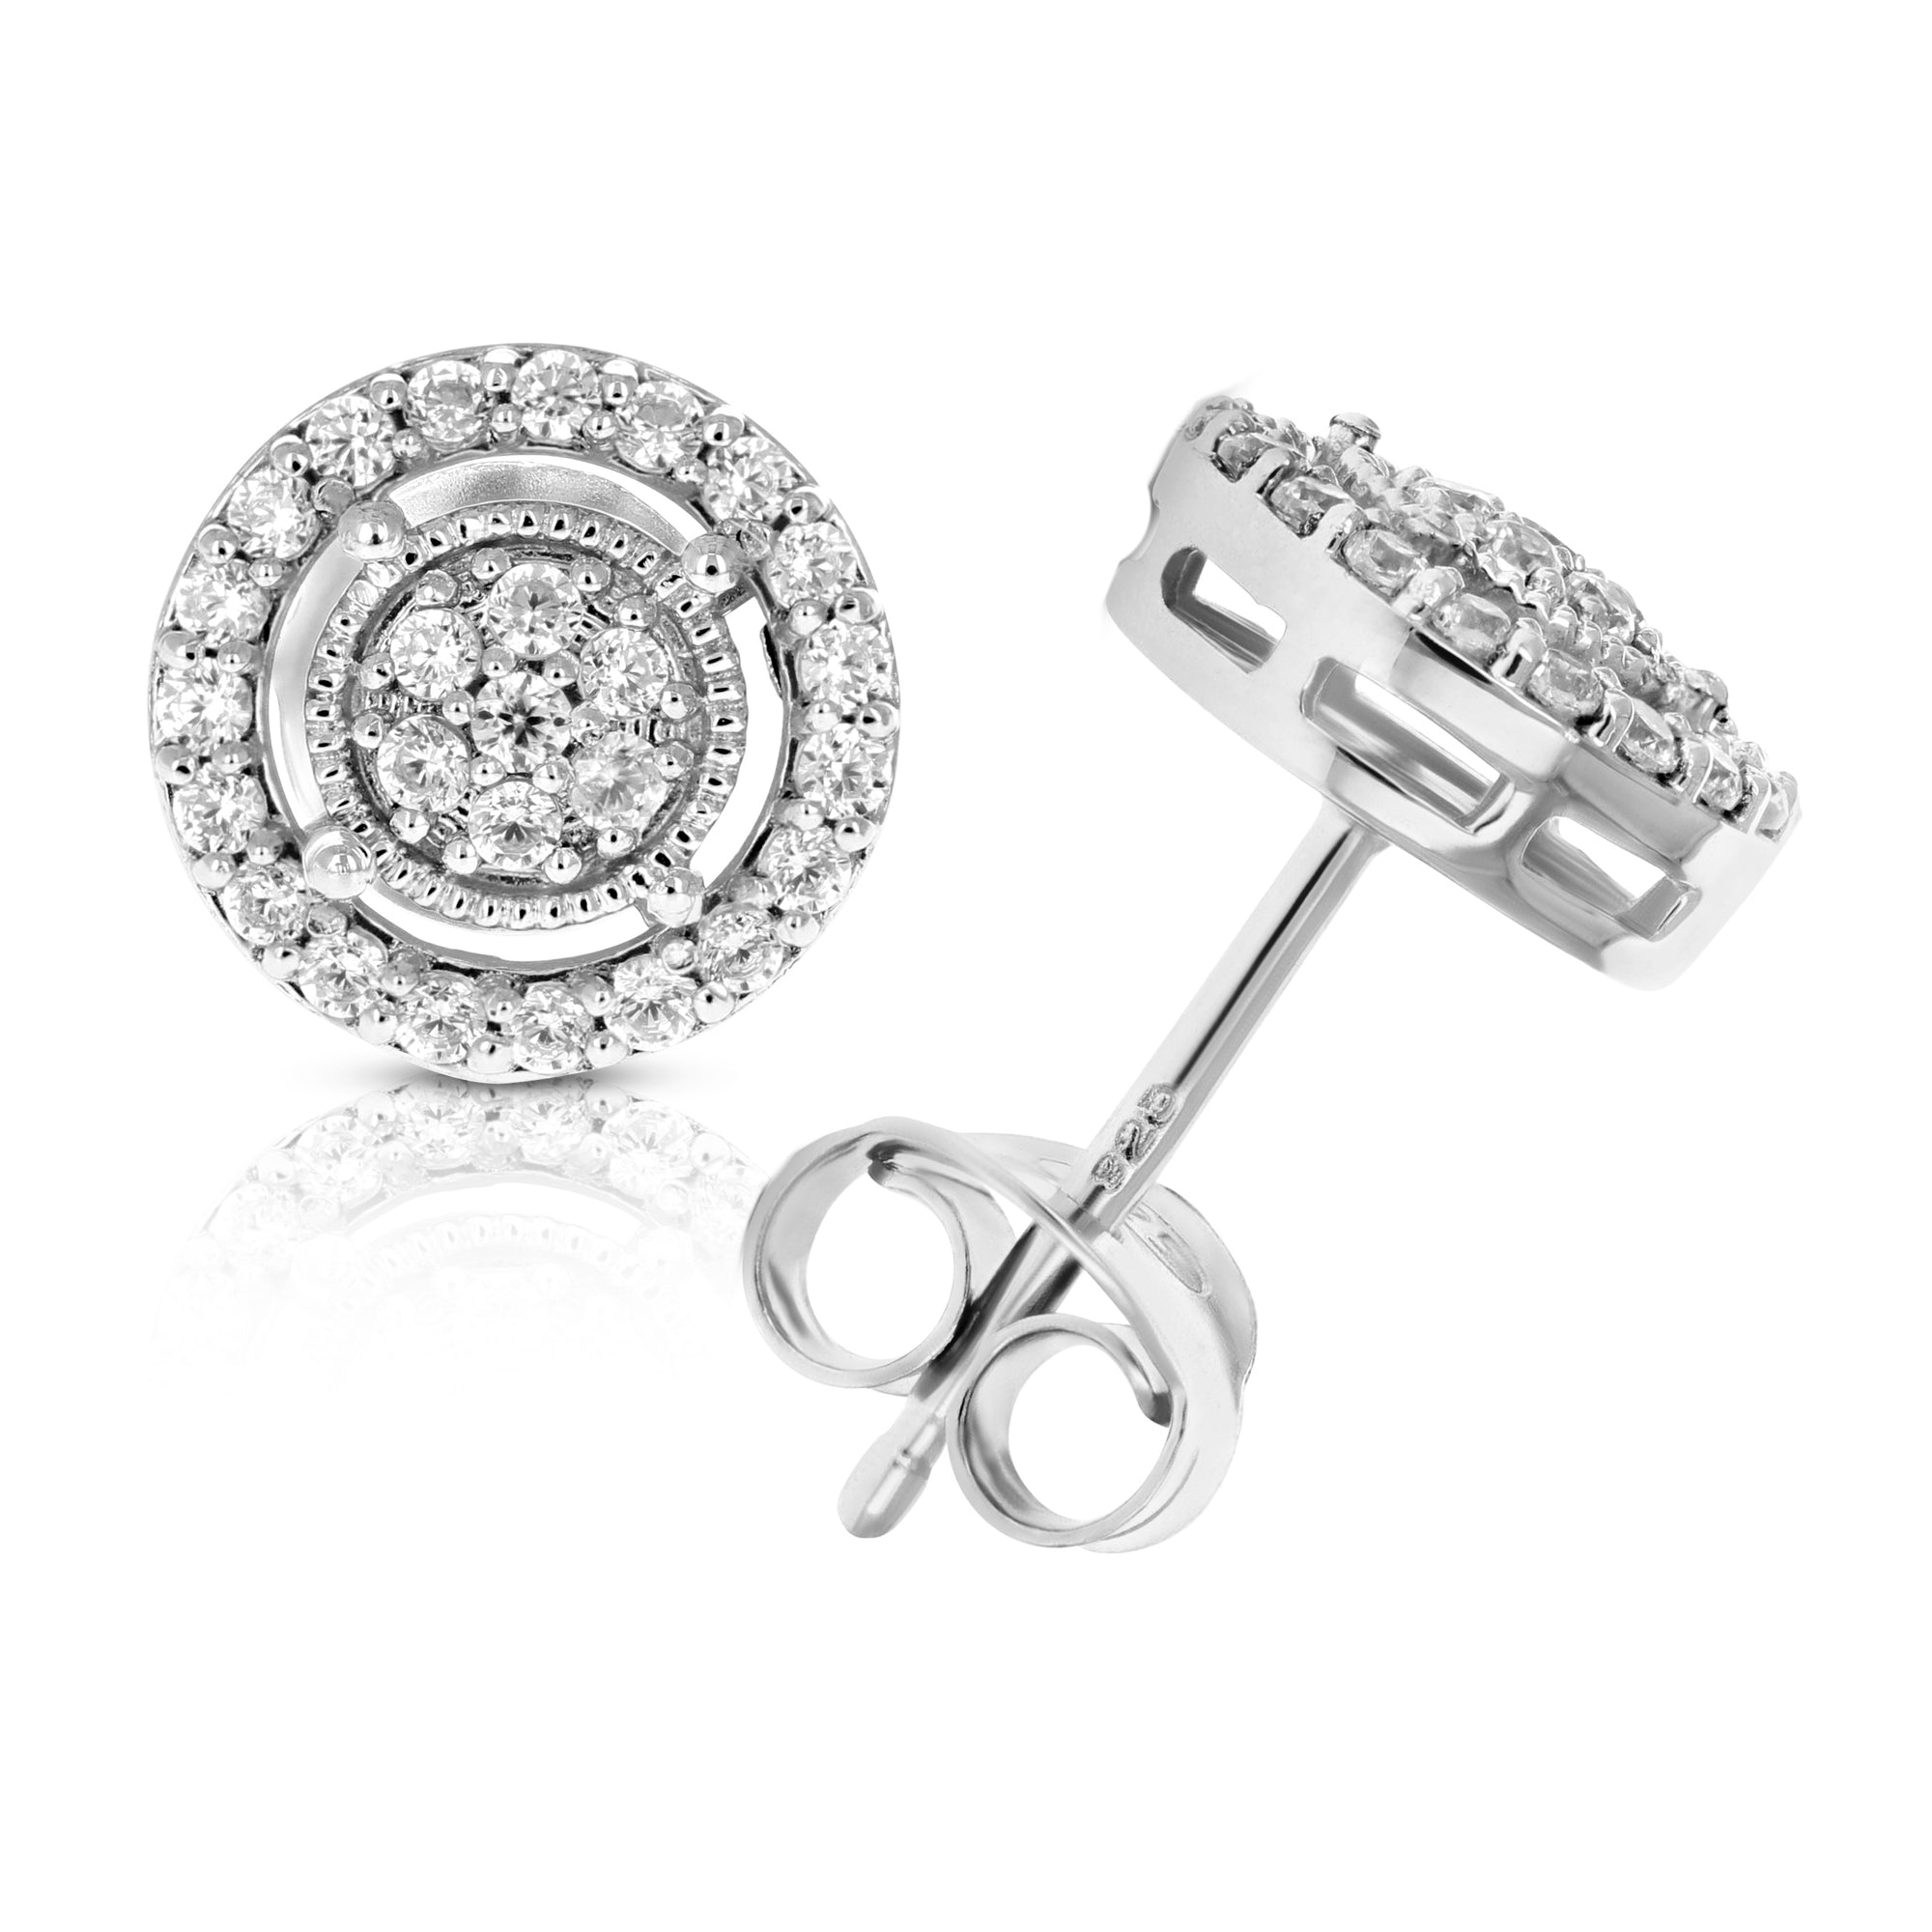 3/8 cttw Round Diamond Stud Earrings in .925 Sterling Silver With Rhodium